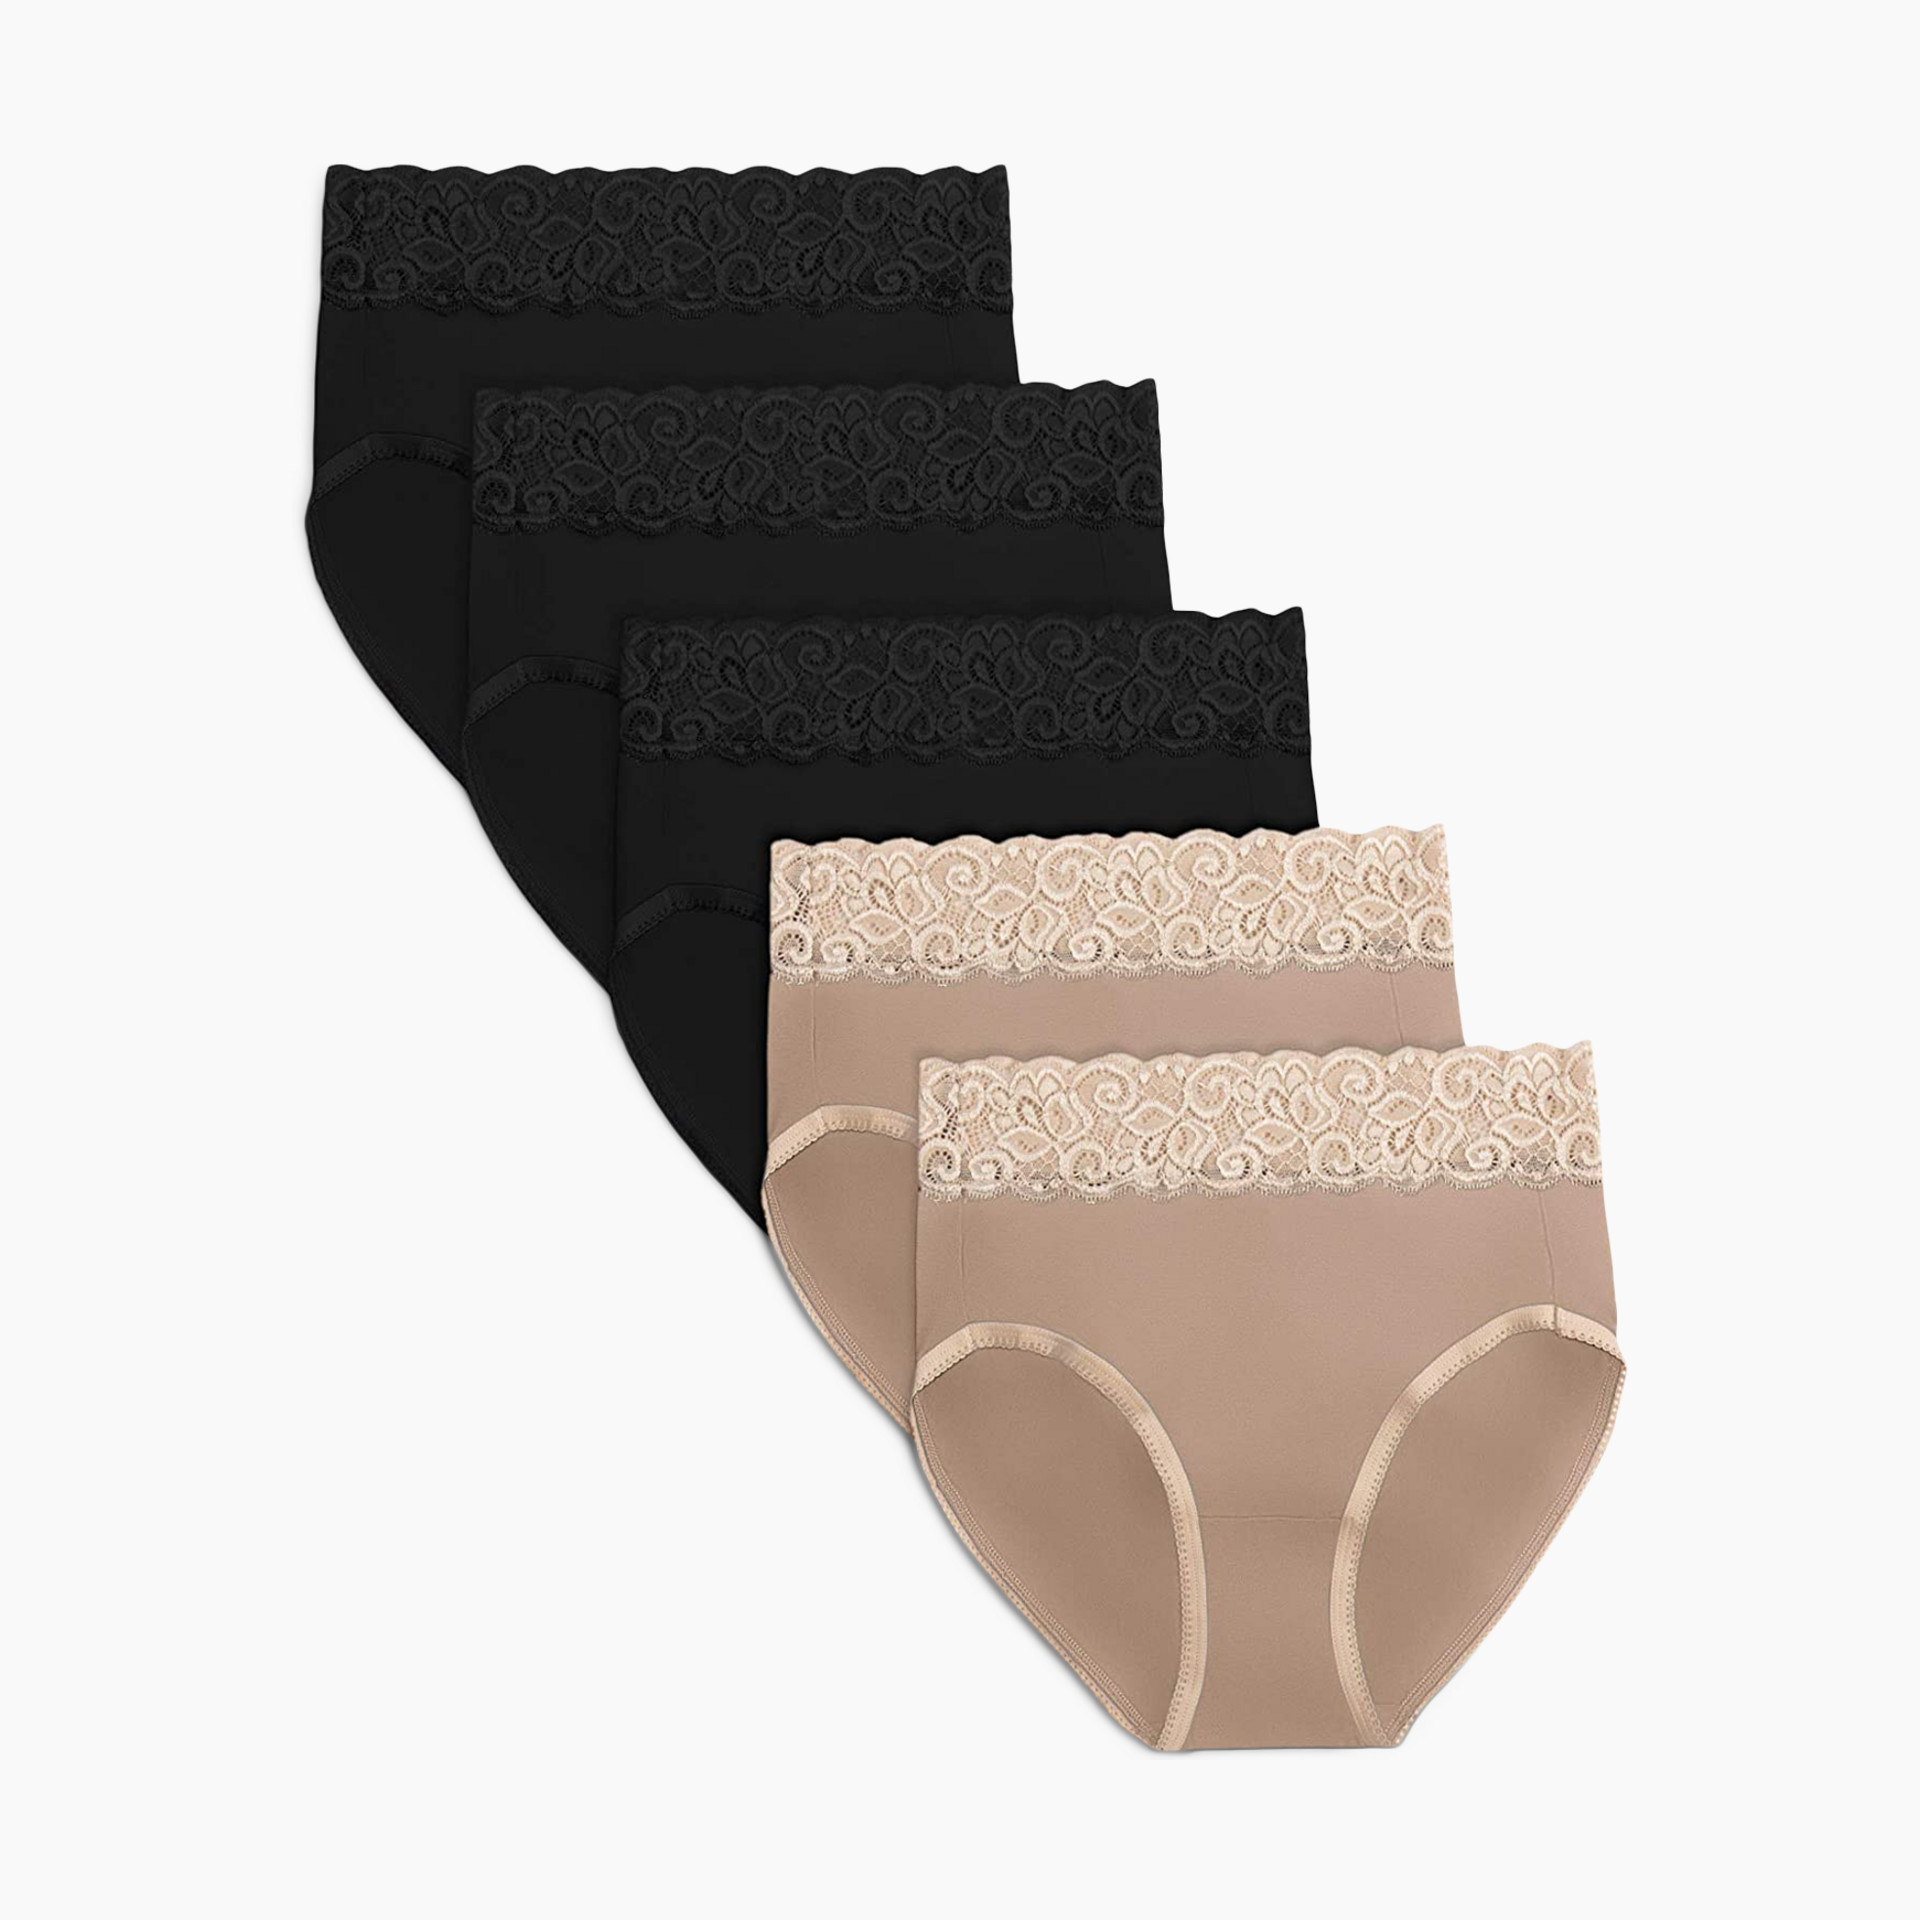 Kindred Bravely Bamboo Maternity Hipster Panties (2 Pack